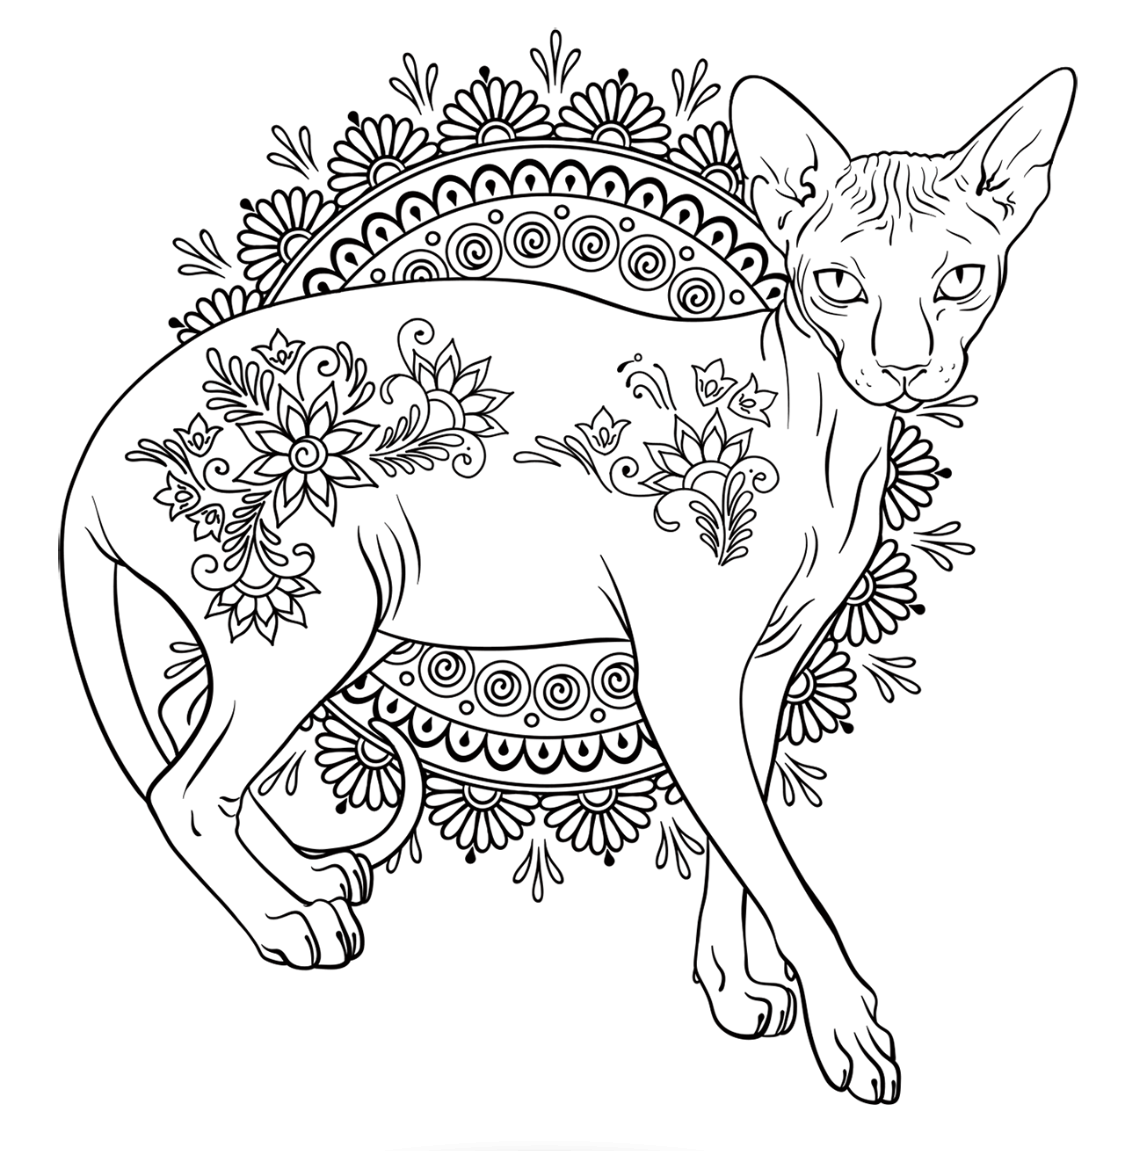 Zentangle Cat Coloring Pages at GetColorings.com | Free printable